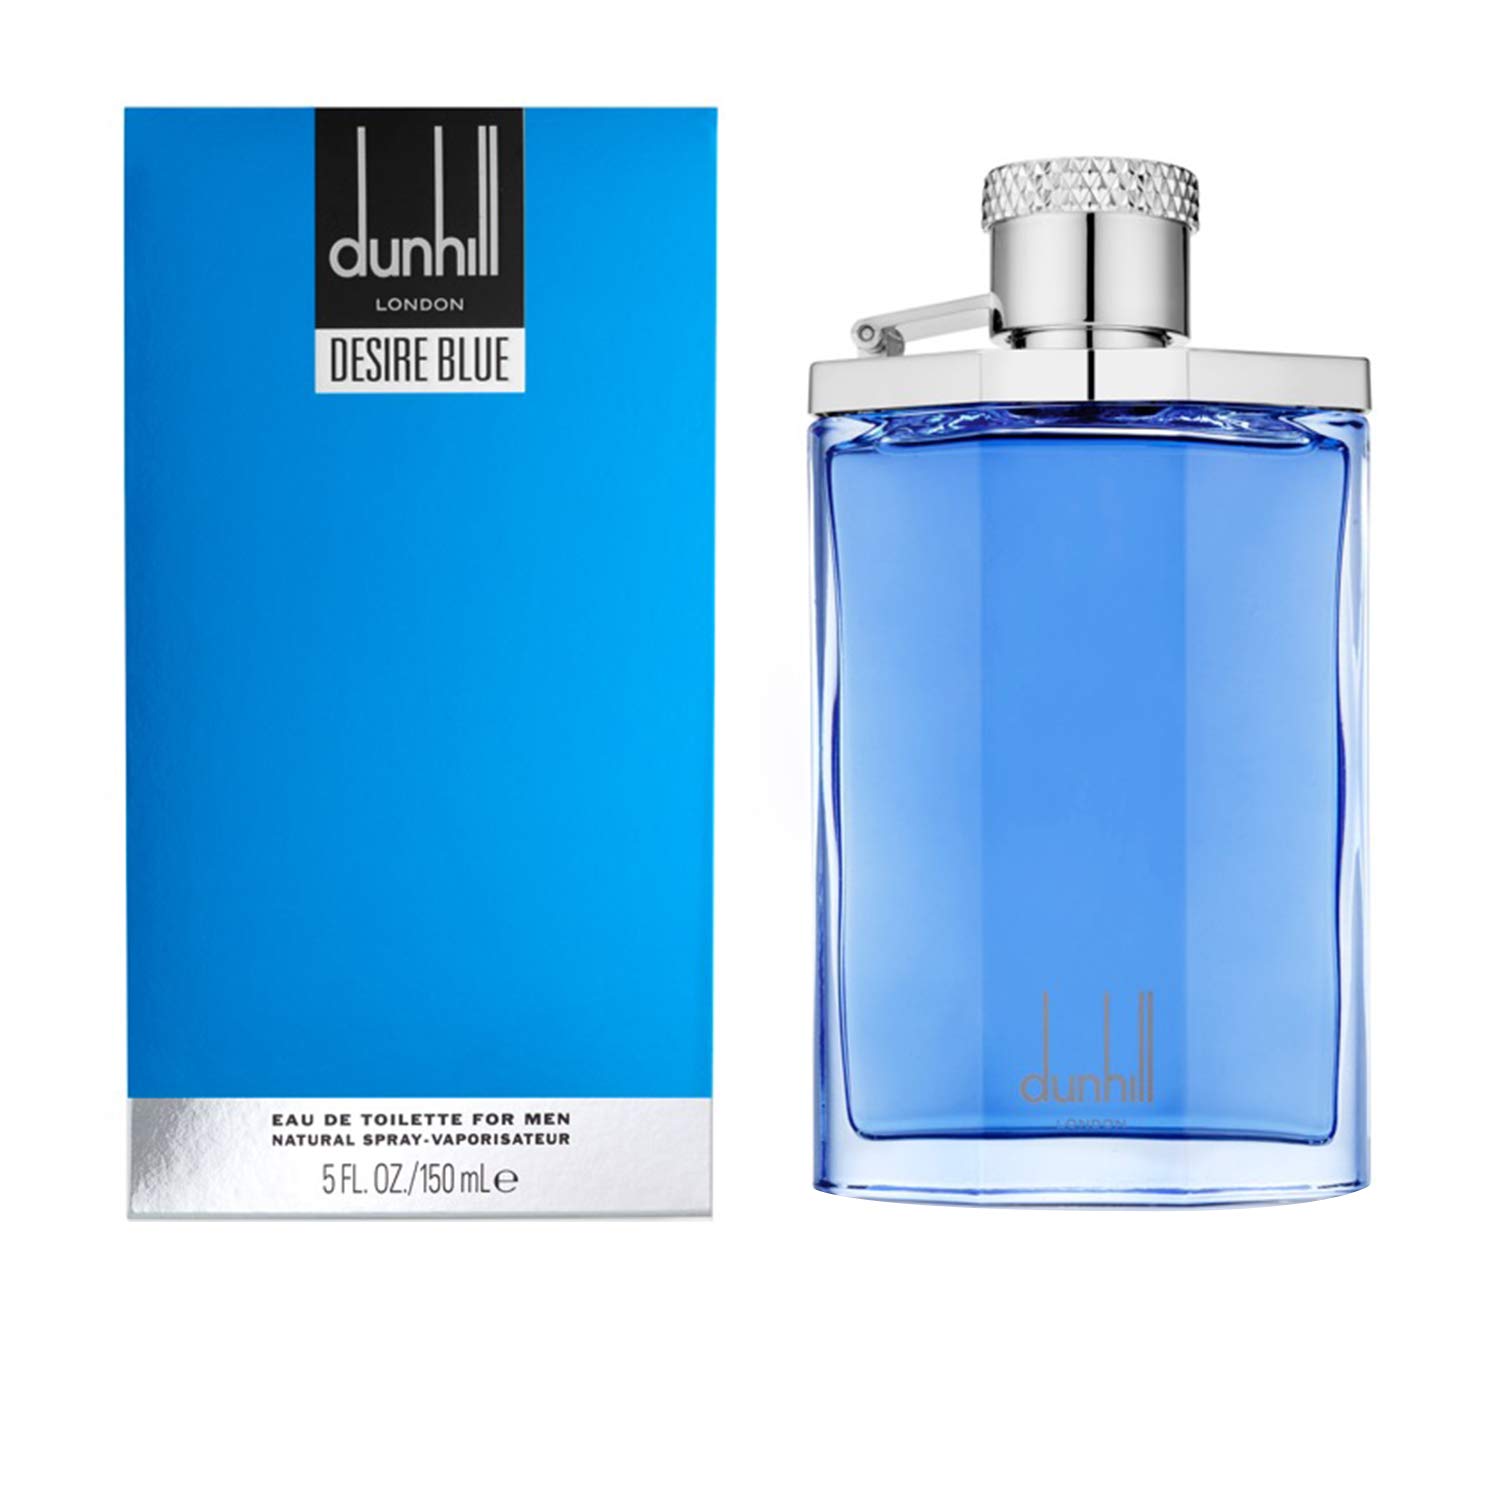 Dunhill Desire Blue Edt Ml Artemes Perfume Beauty Care